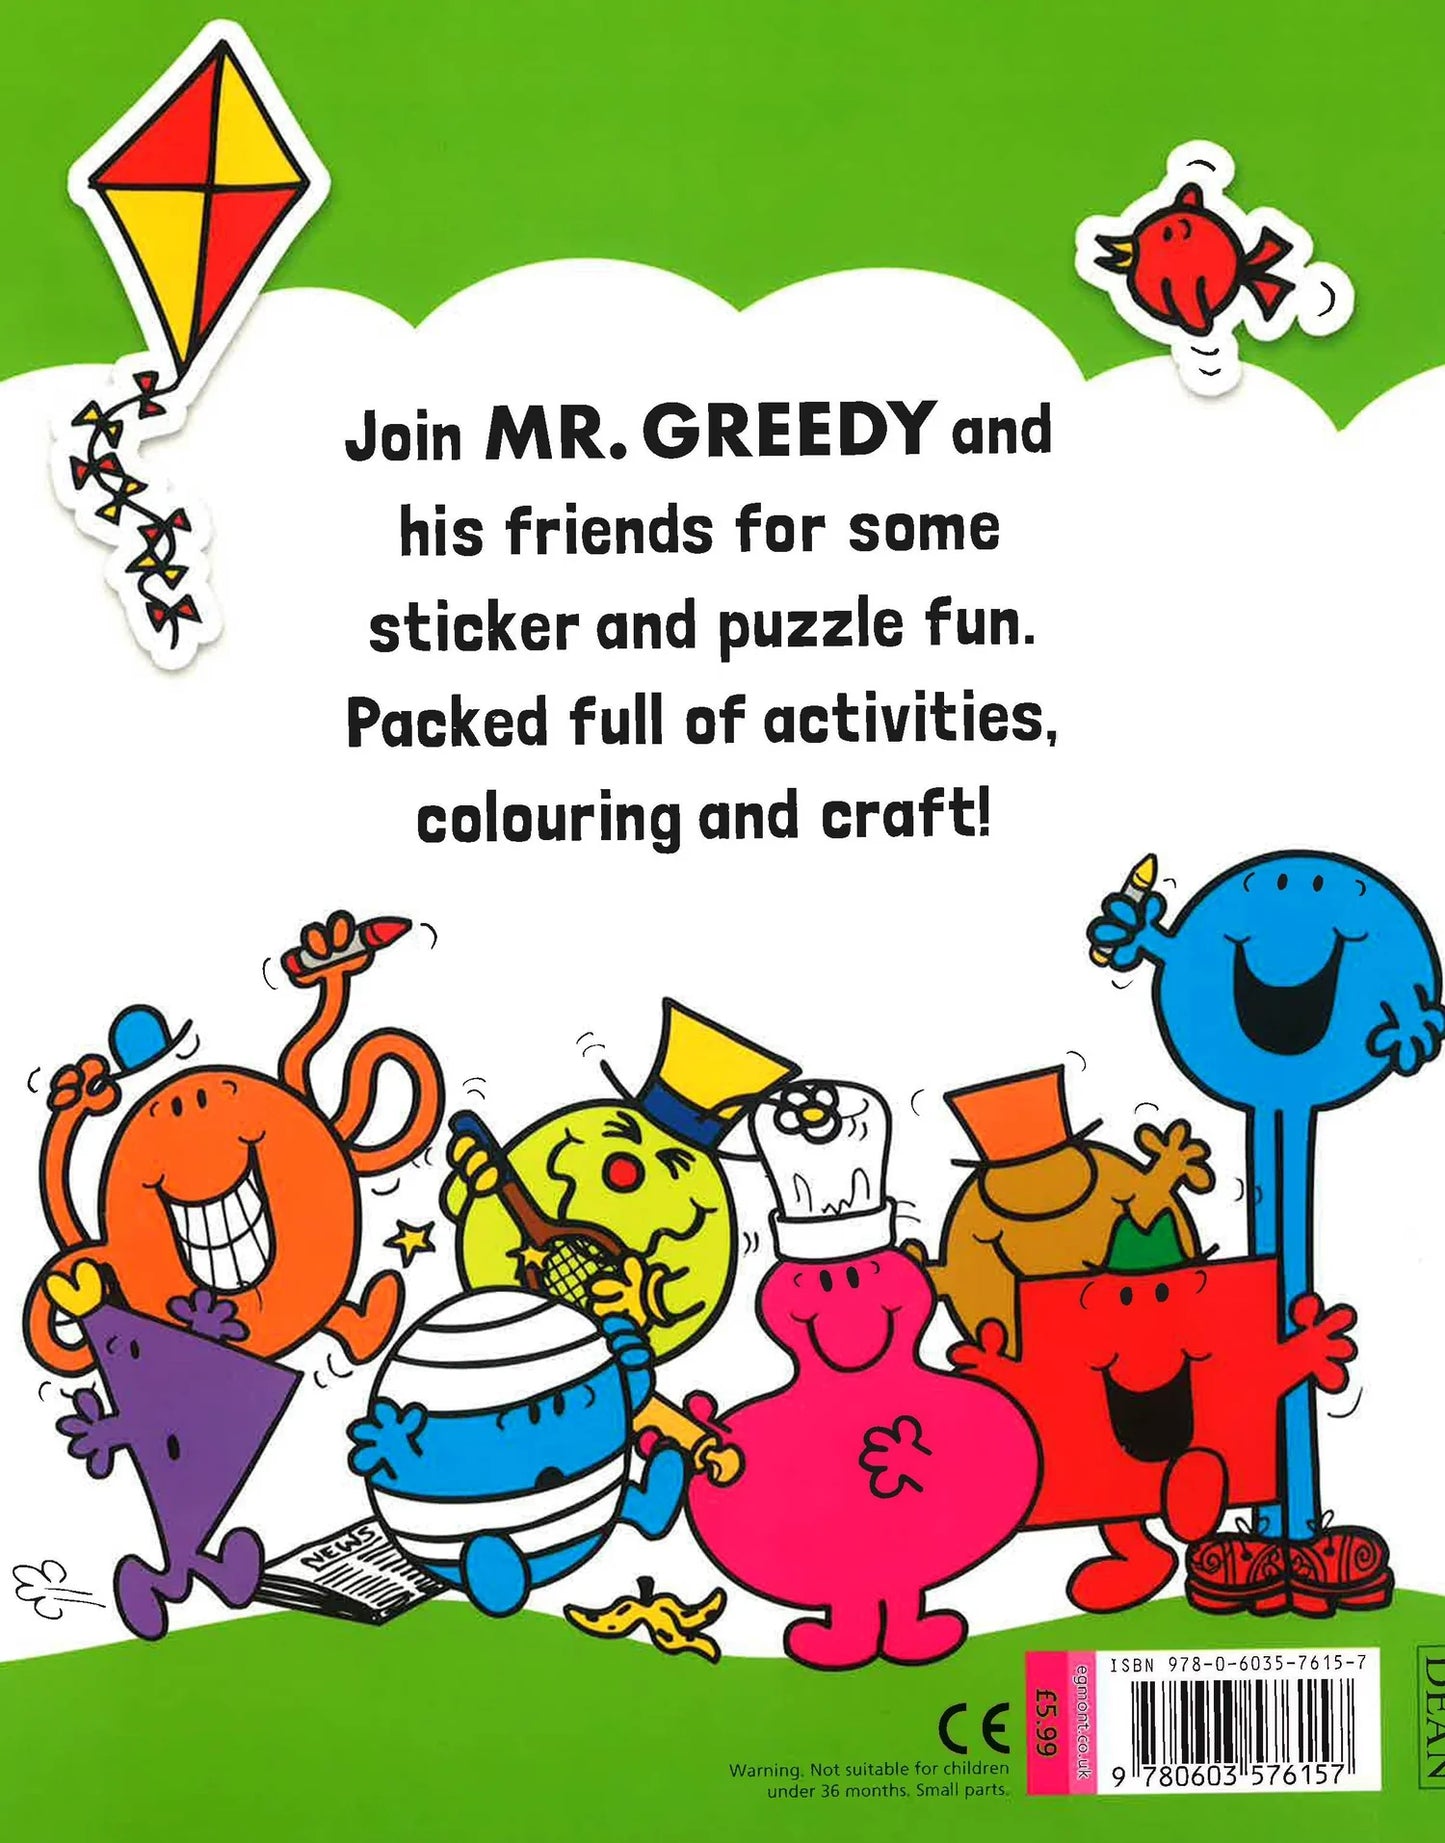 Mr Greedy and Friends Sticker & Puzzle Fun with over 100 Stickers